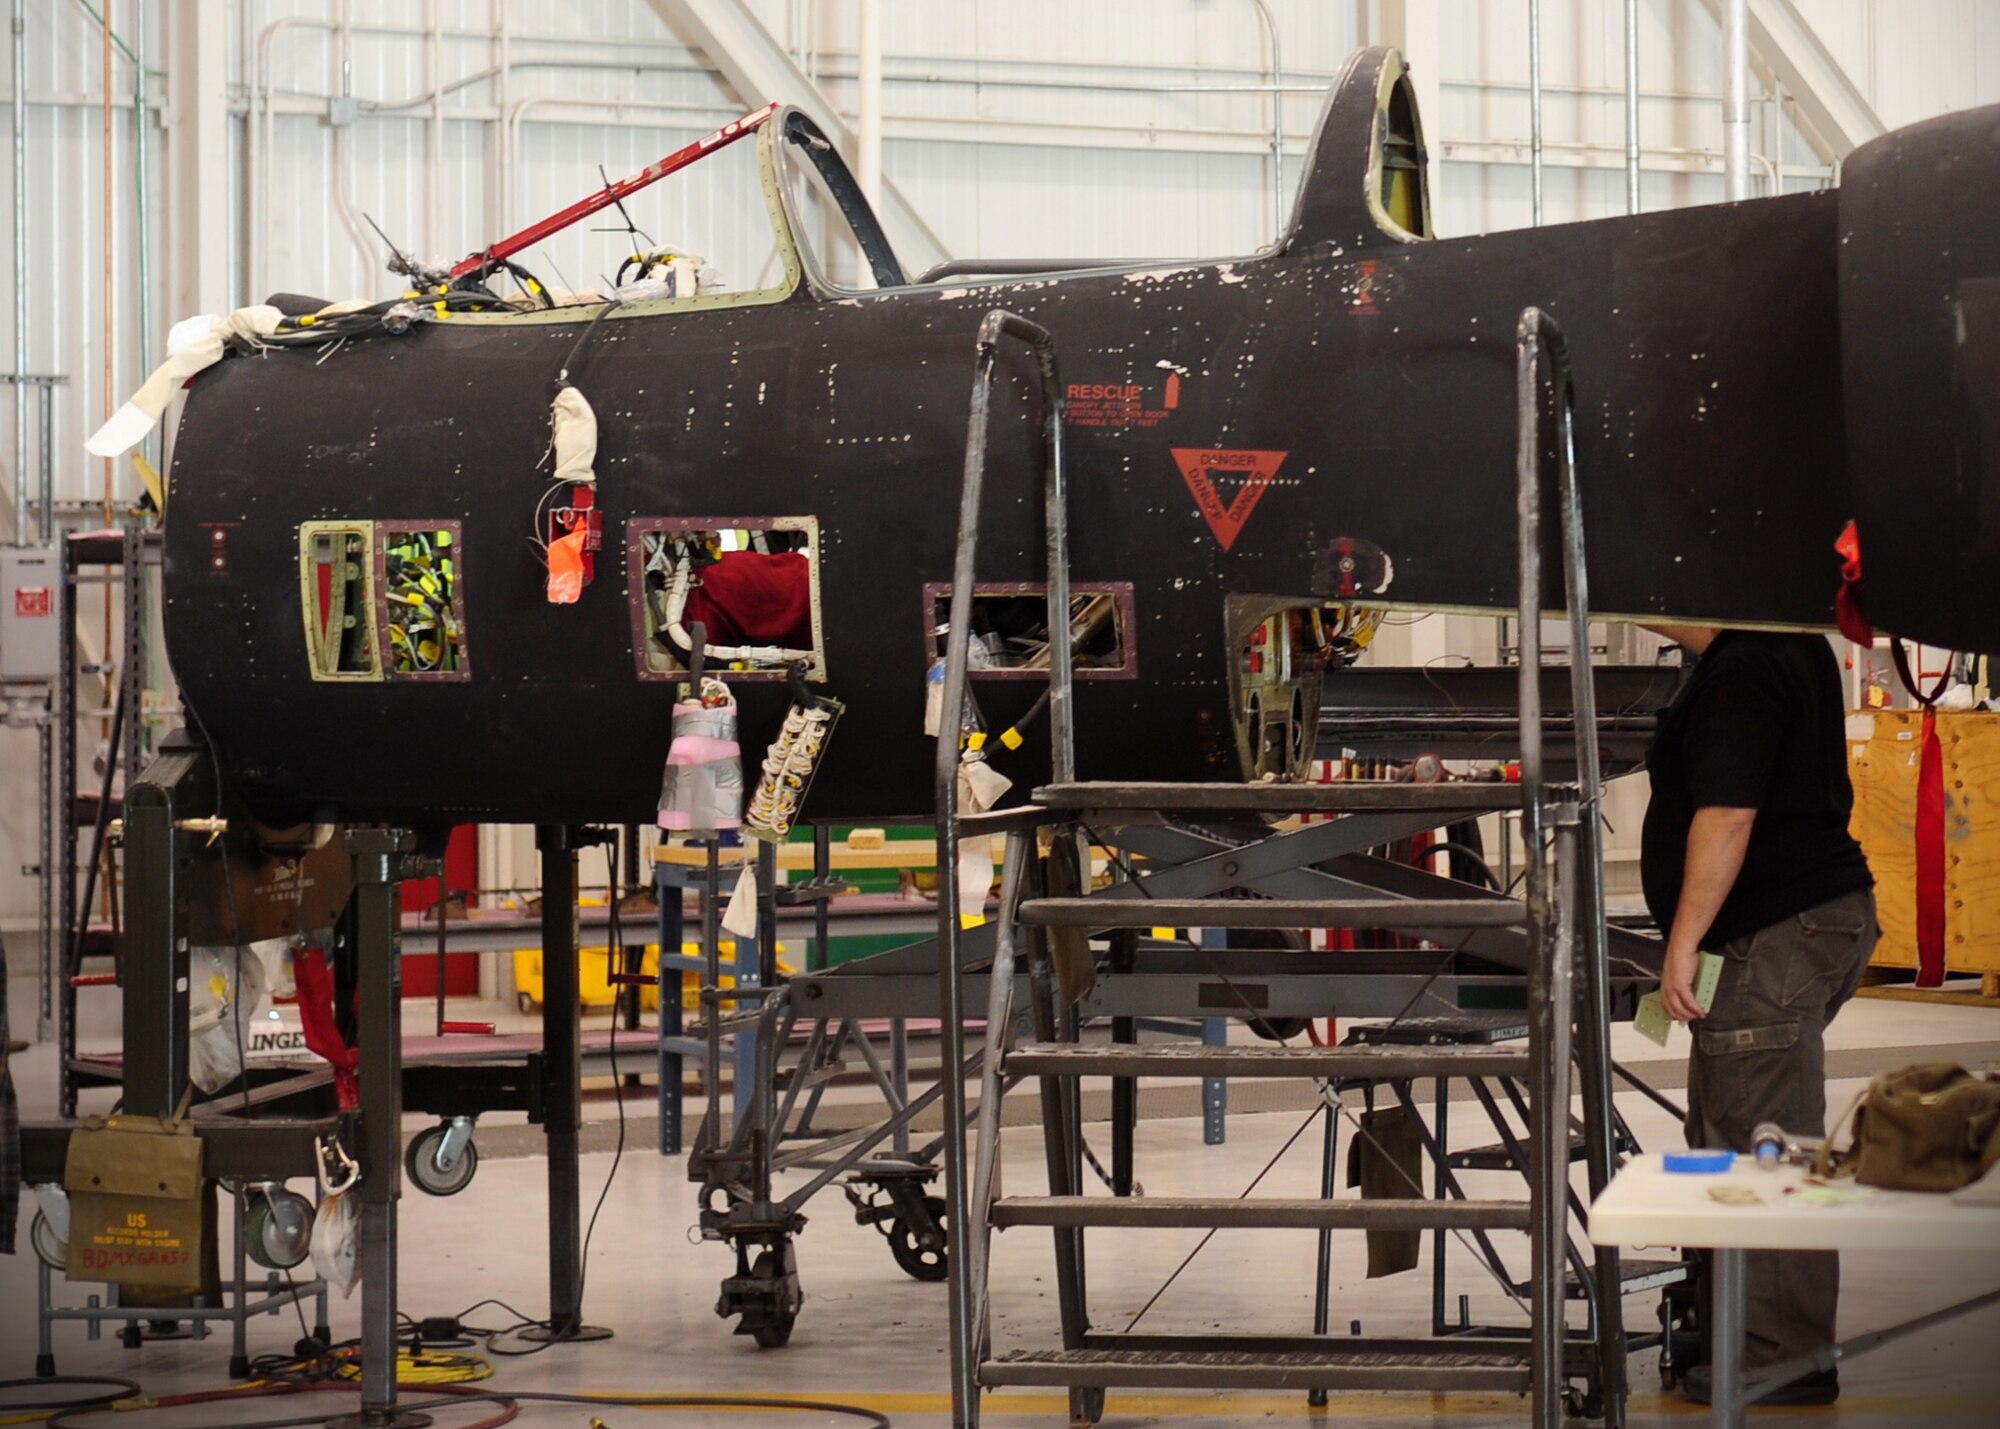 Jack Jackson, Lockheed Martin aircraft structure mechanic, checks rivets in the frame of a U-2 intelligence, surveillance and reconnaissance aircraft, at Beale Air Force Base, Calif., Feb. 14, 2013. Lockheed mechanics are working on Cockpit Altitude Reduction Effort modifications to retrofit the older design of the U-2 cockpit for pilot safety. (U.S. Air Force photo by Senior Airman Shawn Nickel/Released)